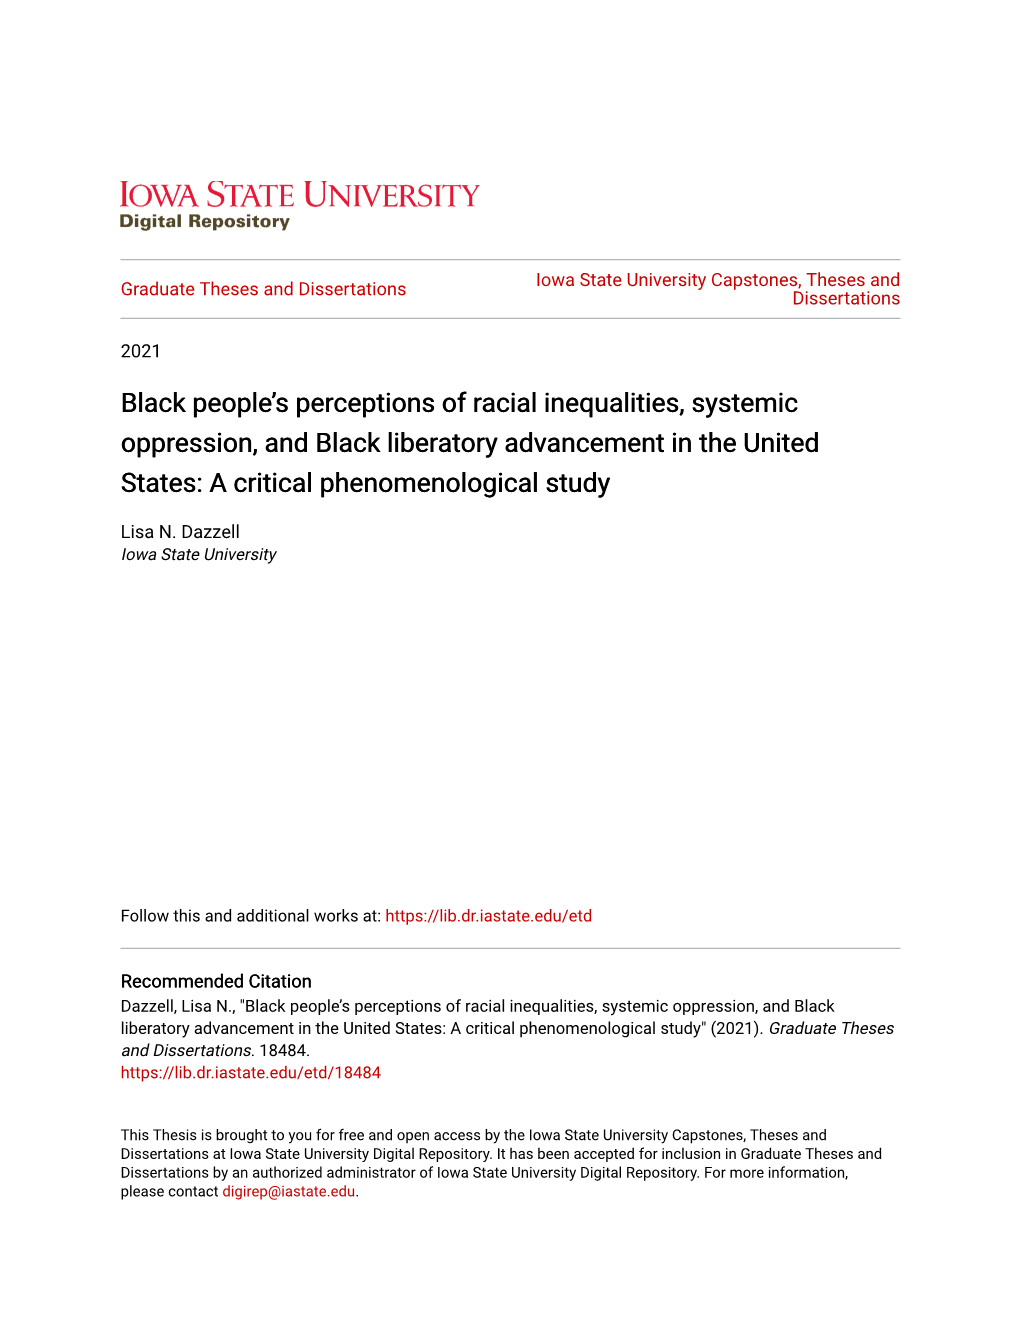 Black People's Perceptions of Racial Inequalities, Systemic Oppression